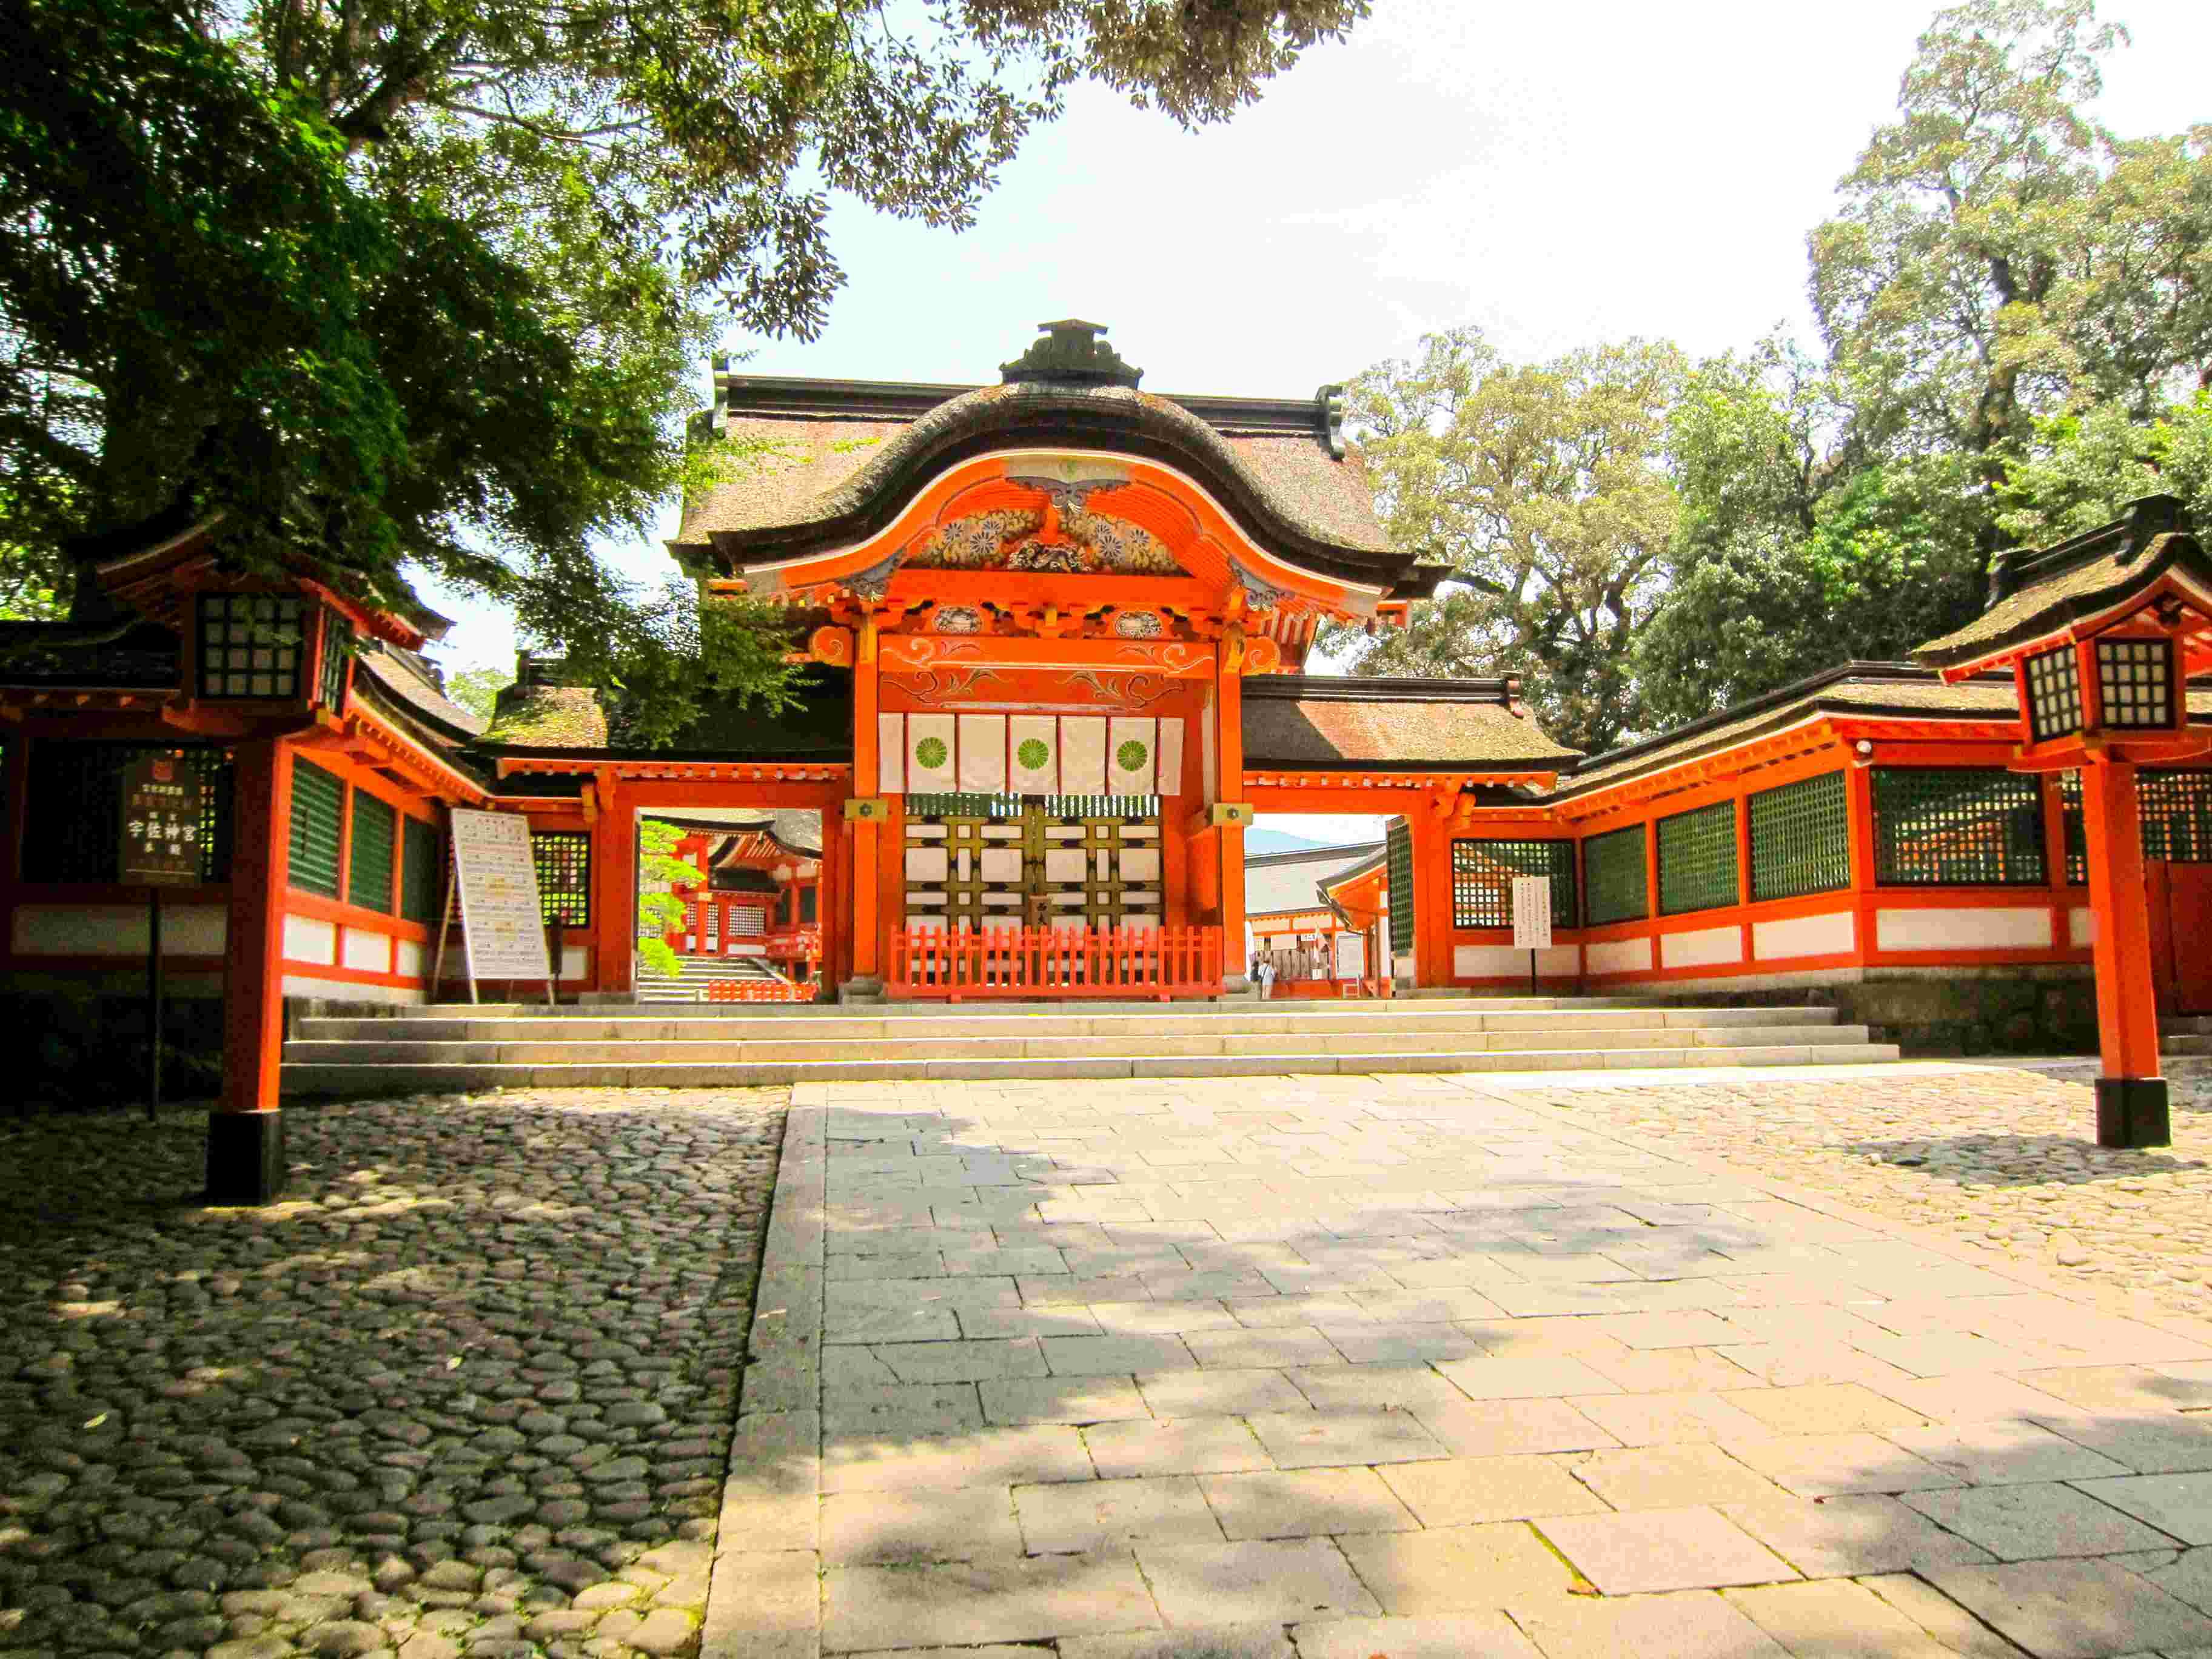 The beautiful main Saidaimon gate, representing Usa Jingū's long history with the Imperial family.